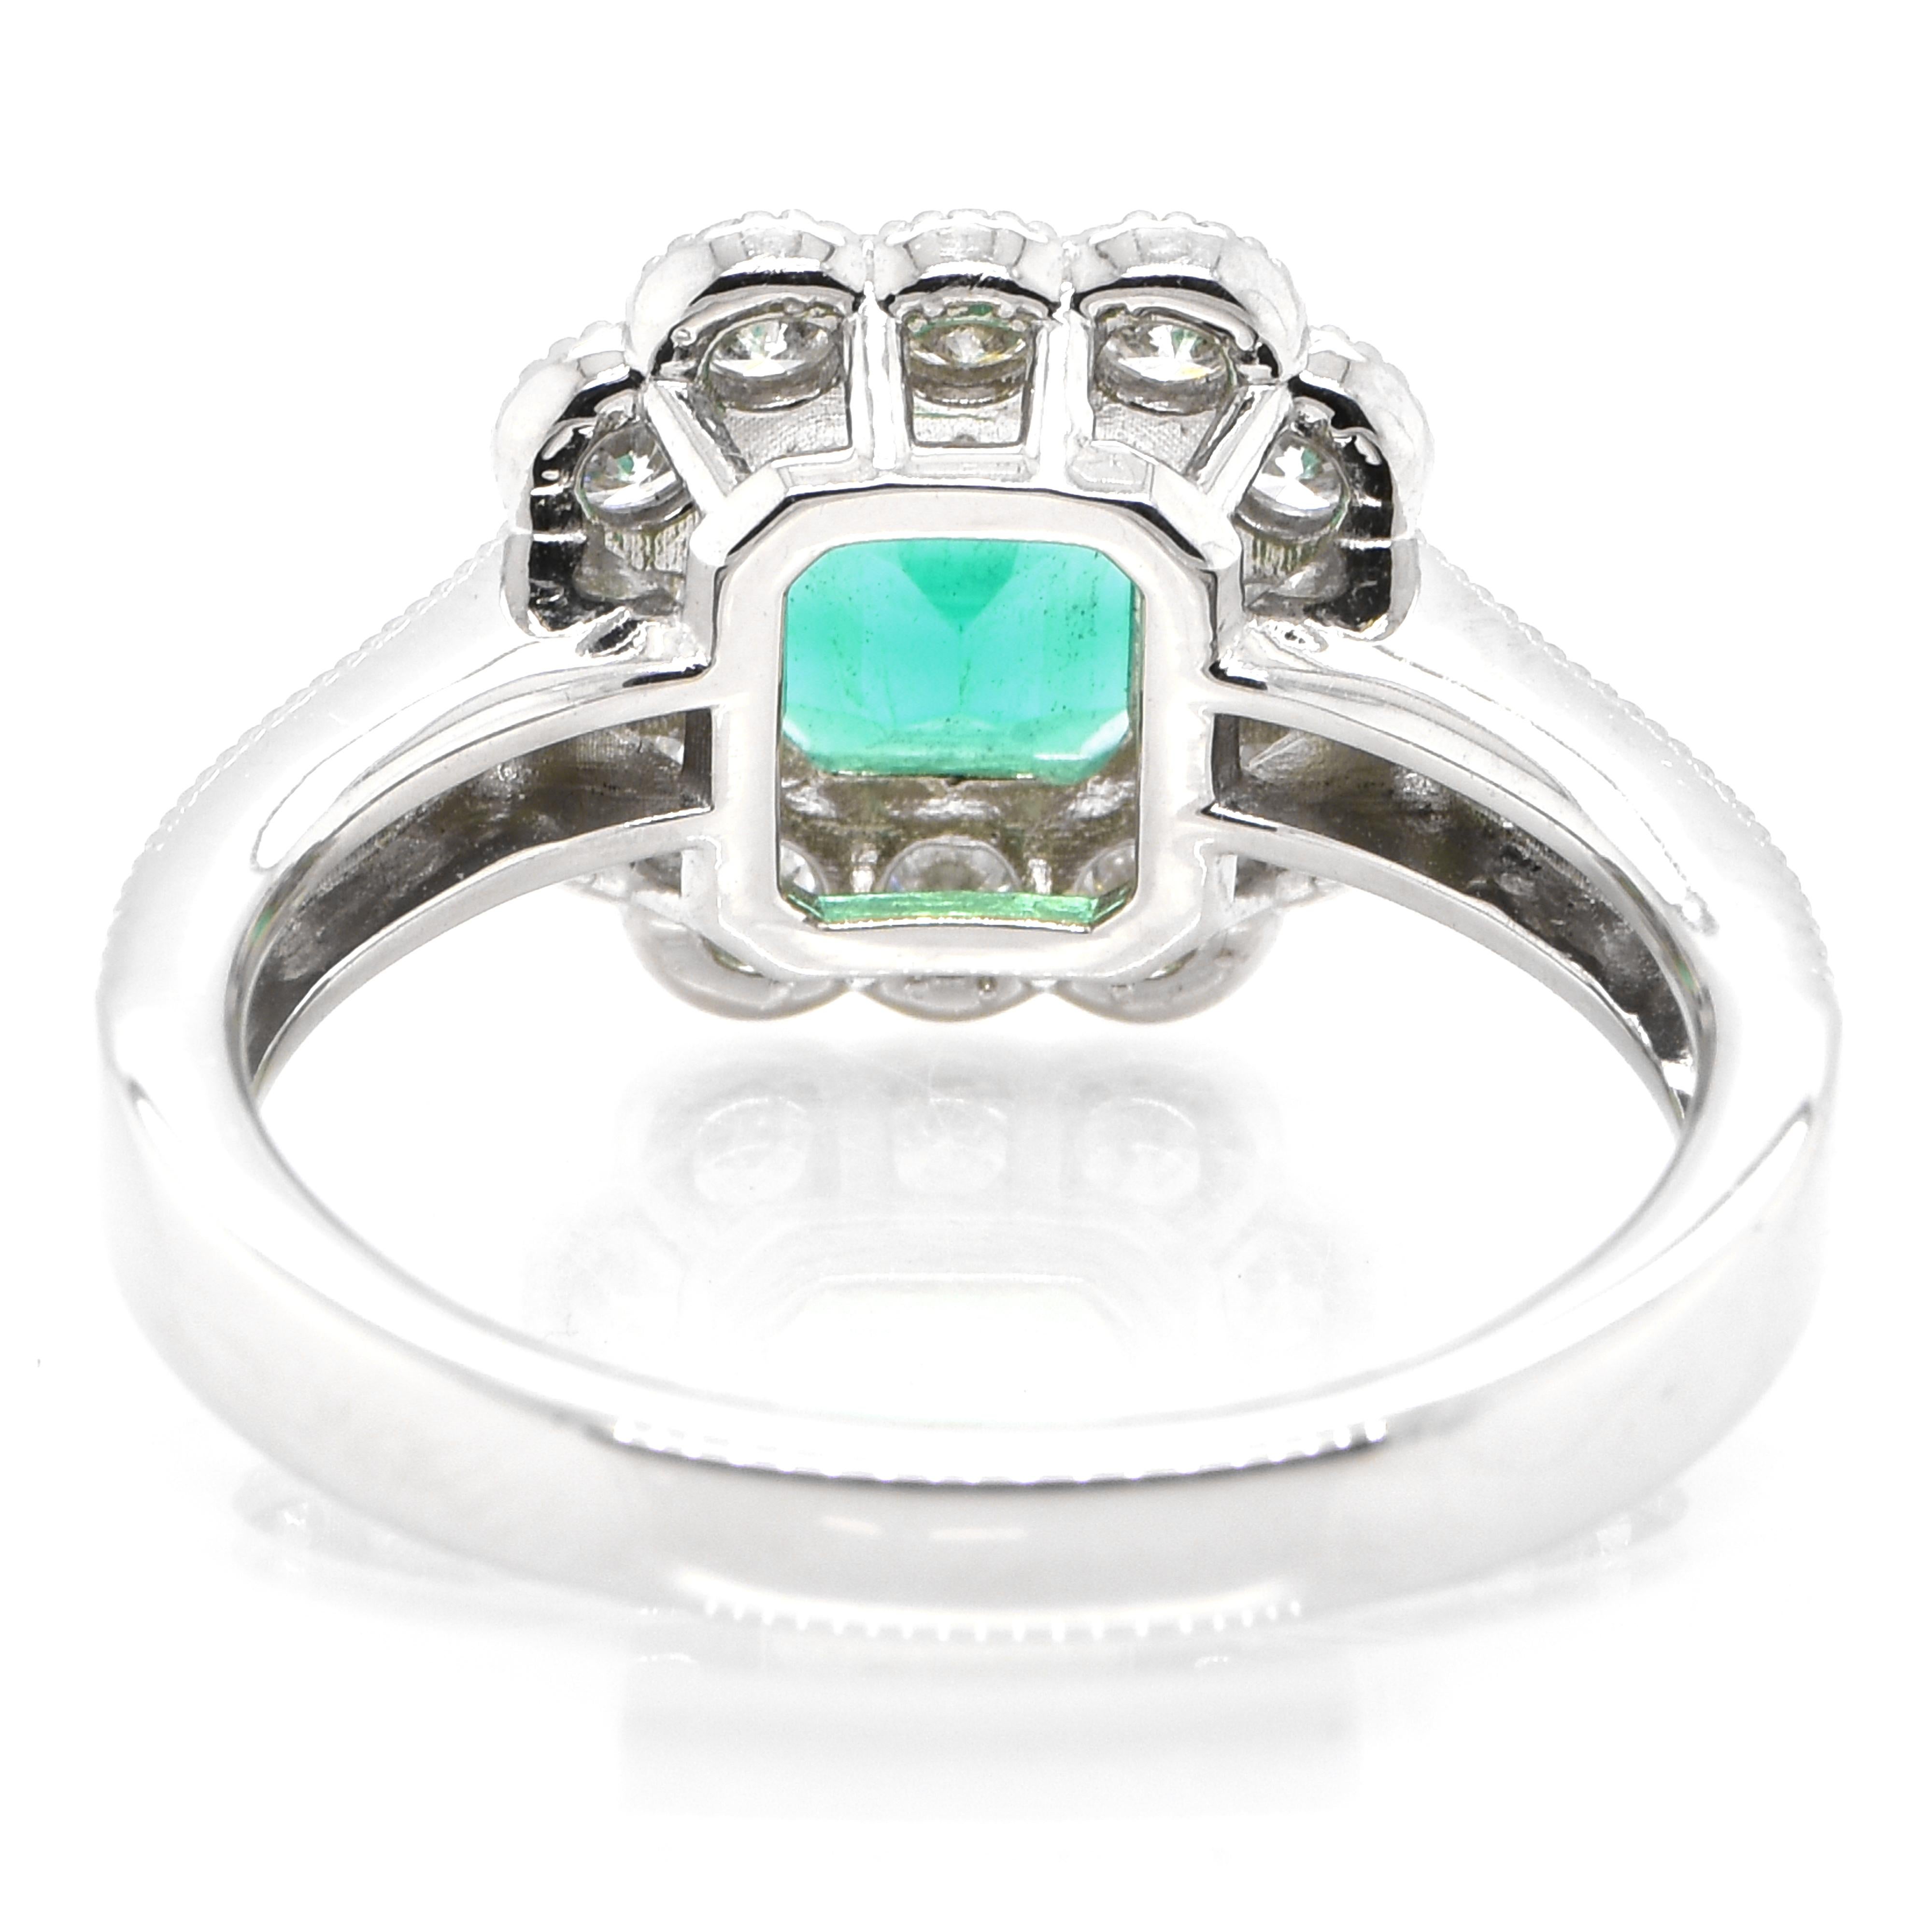 Women's 1.36 Carat Natural Colombian Emerald and Diamond Halo Ring set in Platinum For Sale